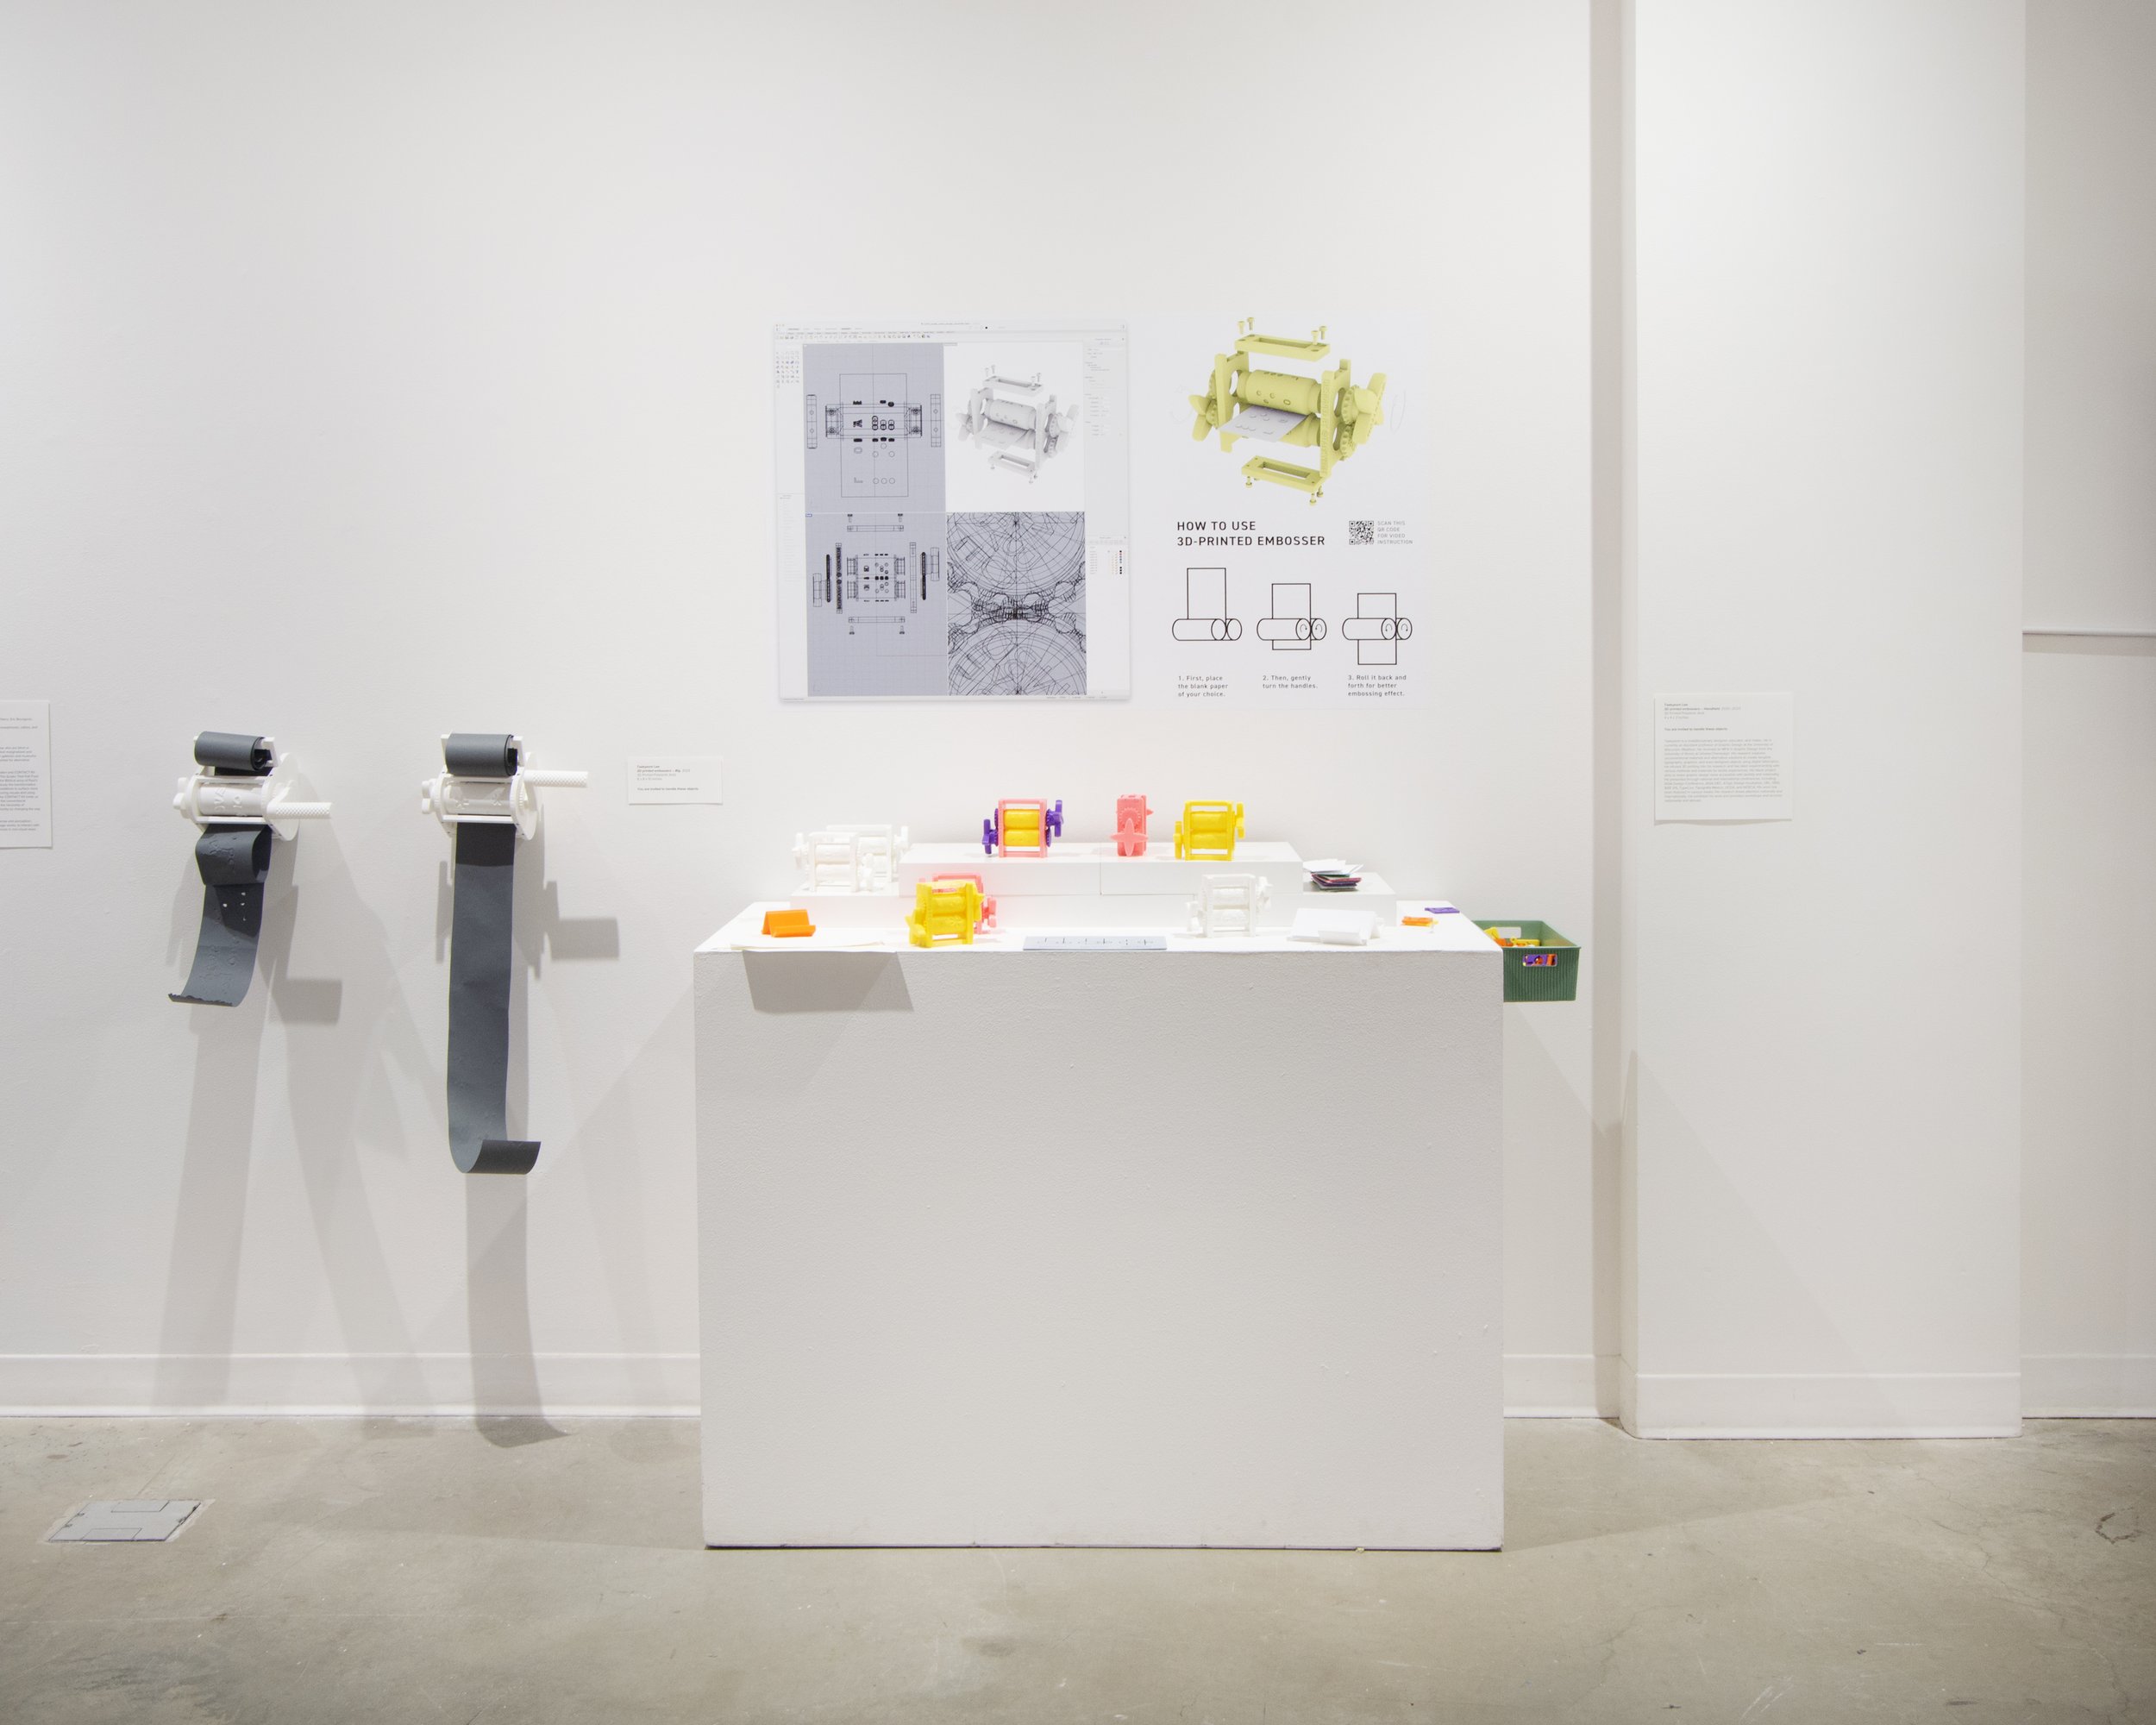 Disrupt and Resist gallery view of Taekyeom Lee installation with pedestal, graphics, and embossing machines